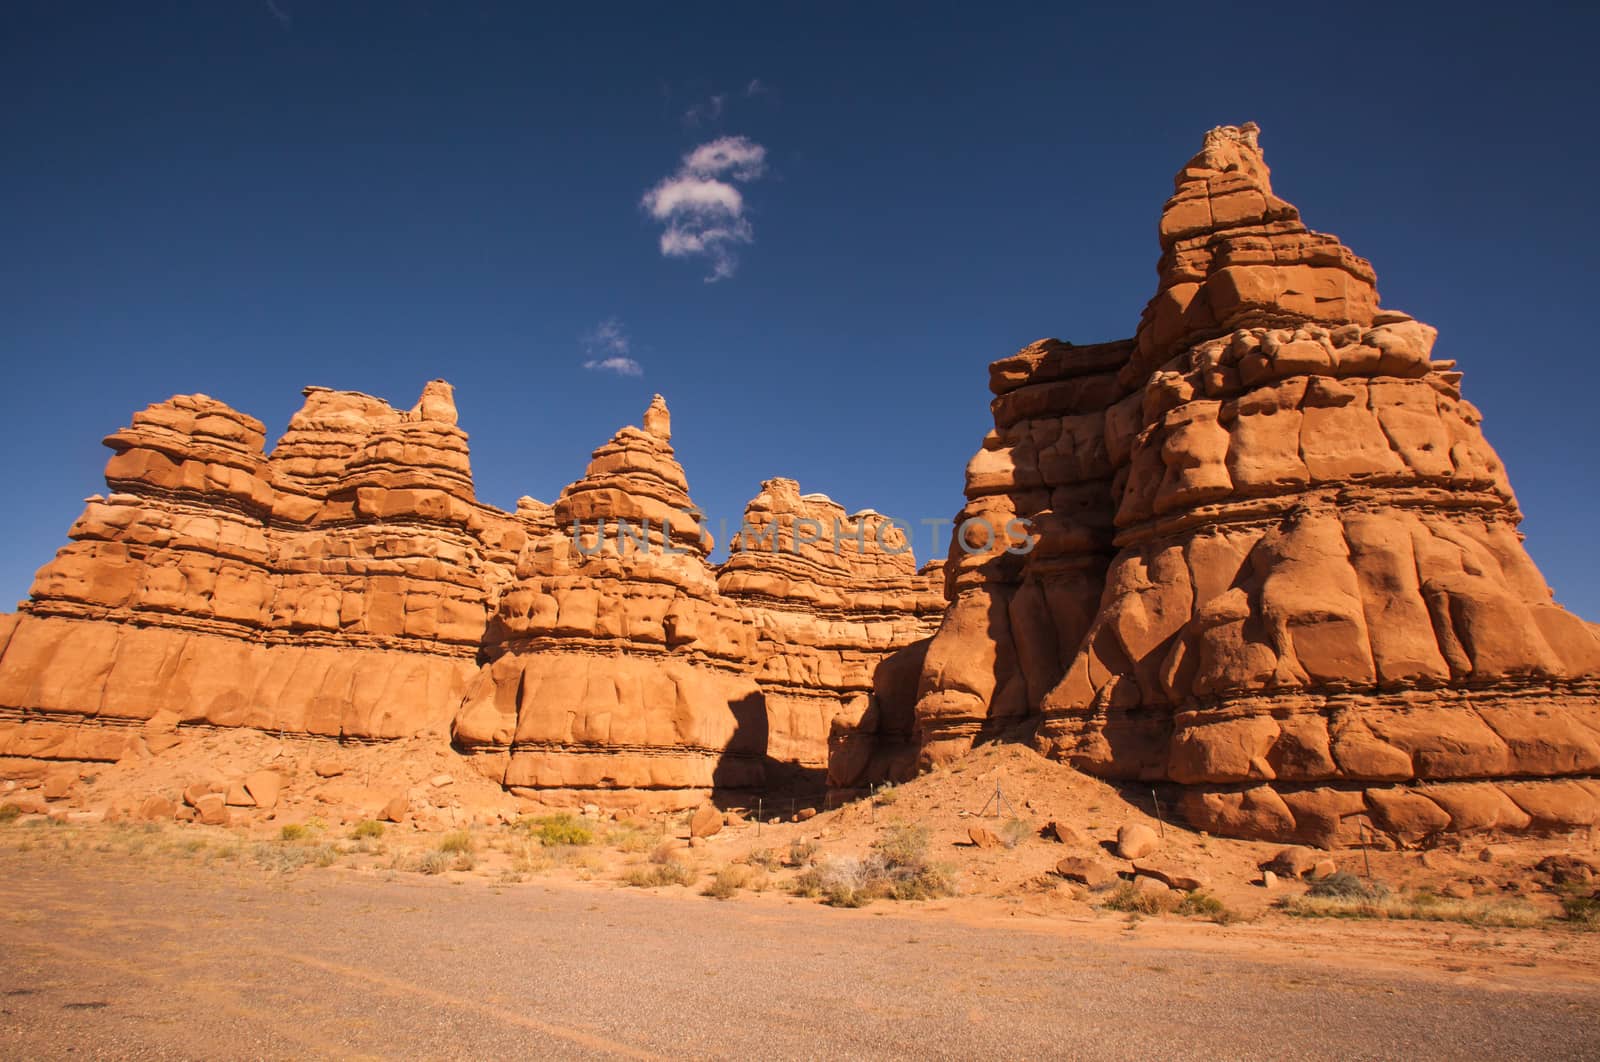 Strange Rock formations on Route 24 Wayne County UT by kobus_peche